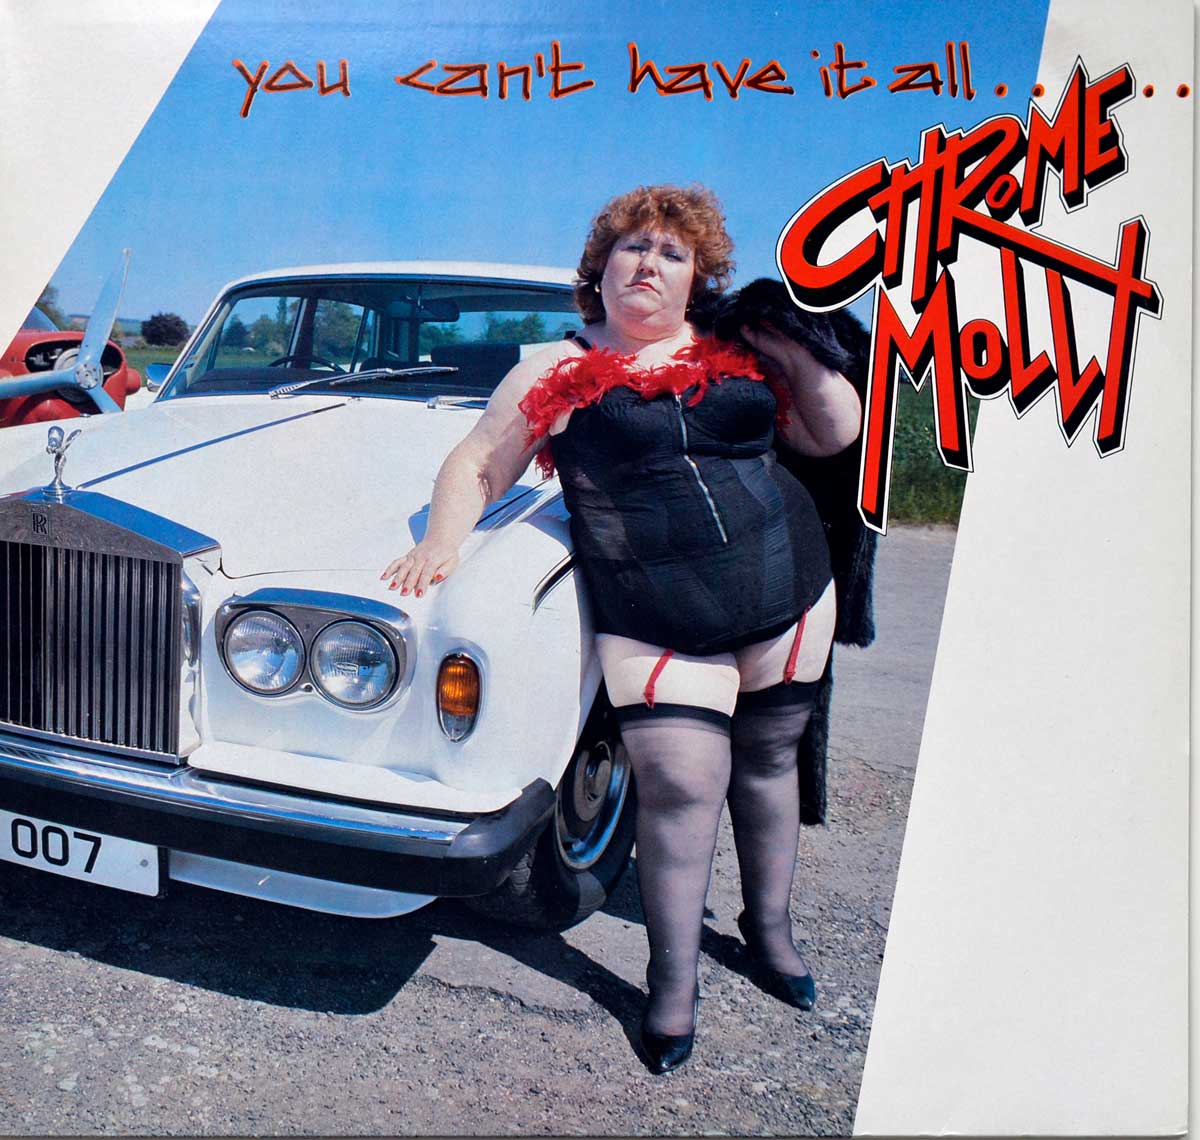 High Resolution Photo Album Front Cover of CHROME MOLLY You Can’t Have it All https://vinyl-records.nl